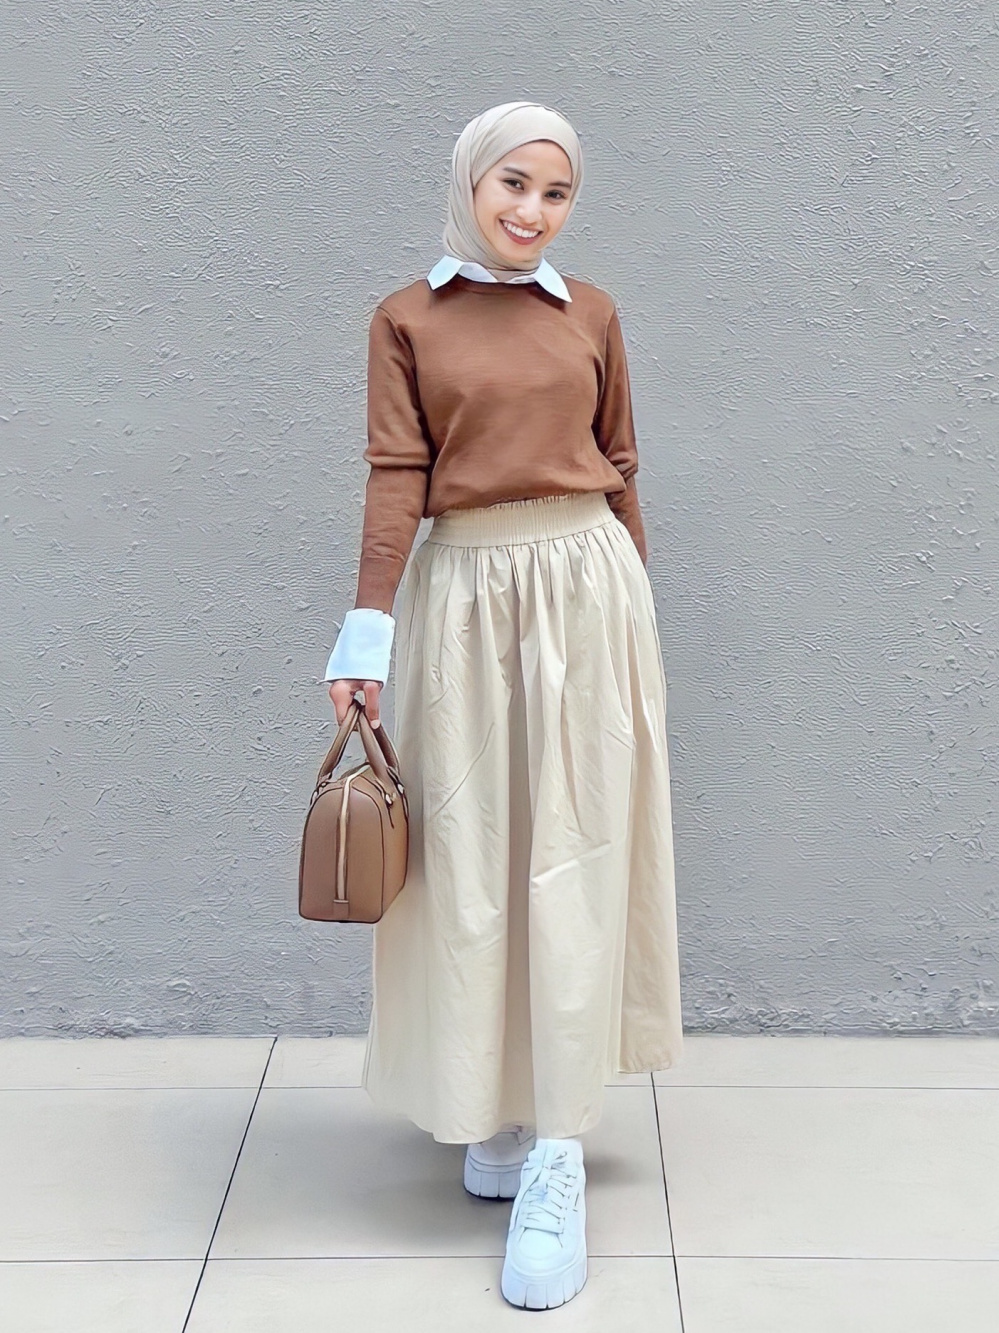 Check styling ideas for「Easy Flared Leggings Trousers、2 WAY Boston Bag」